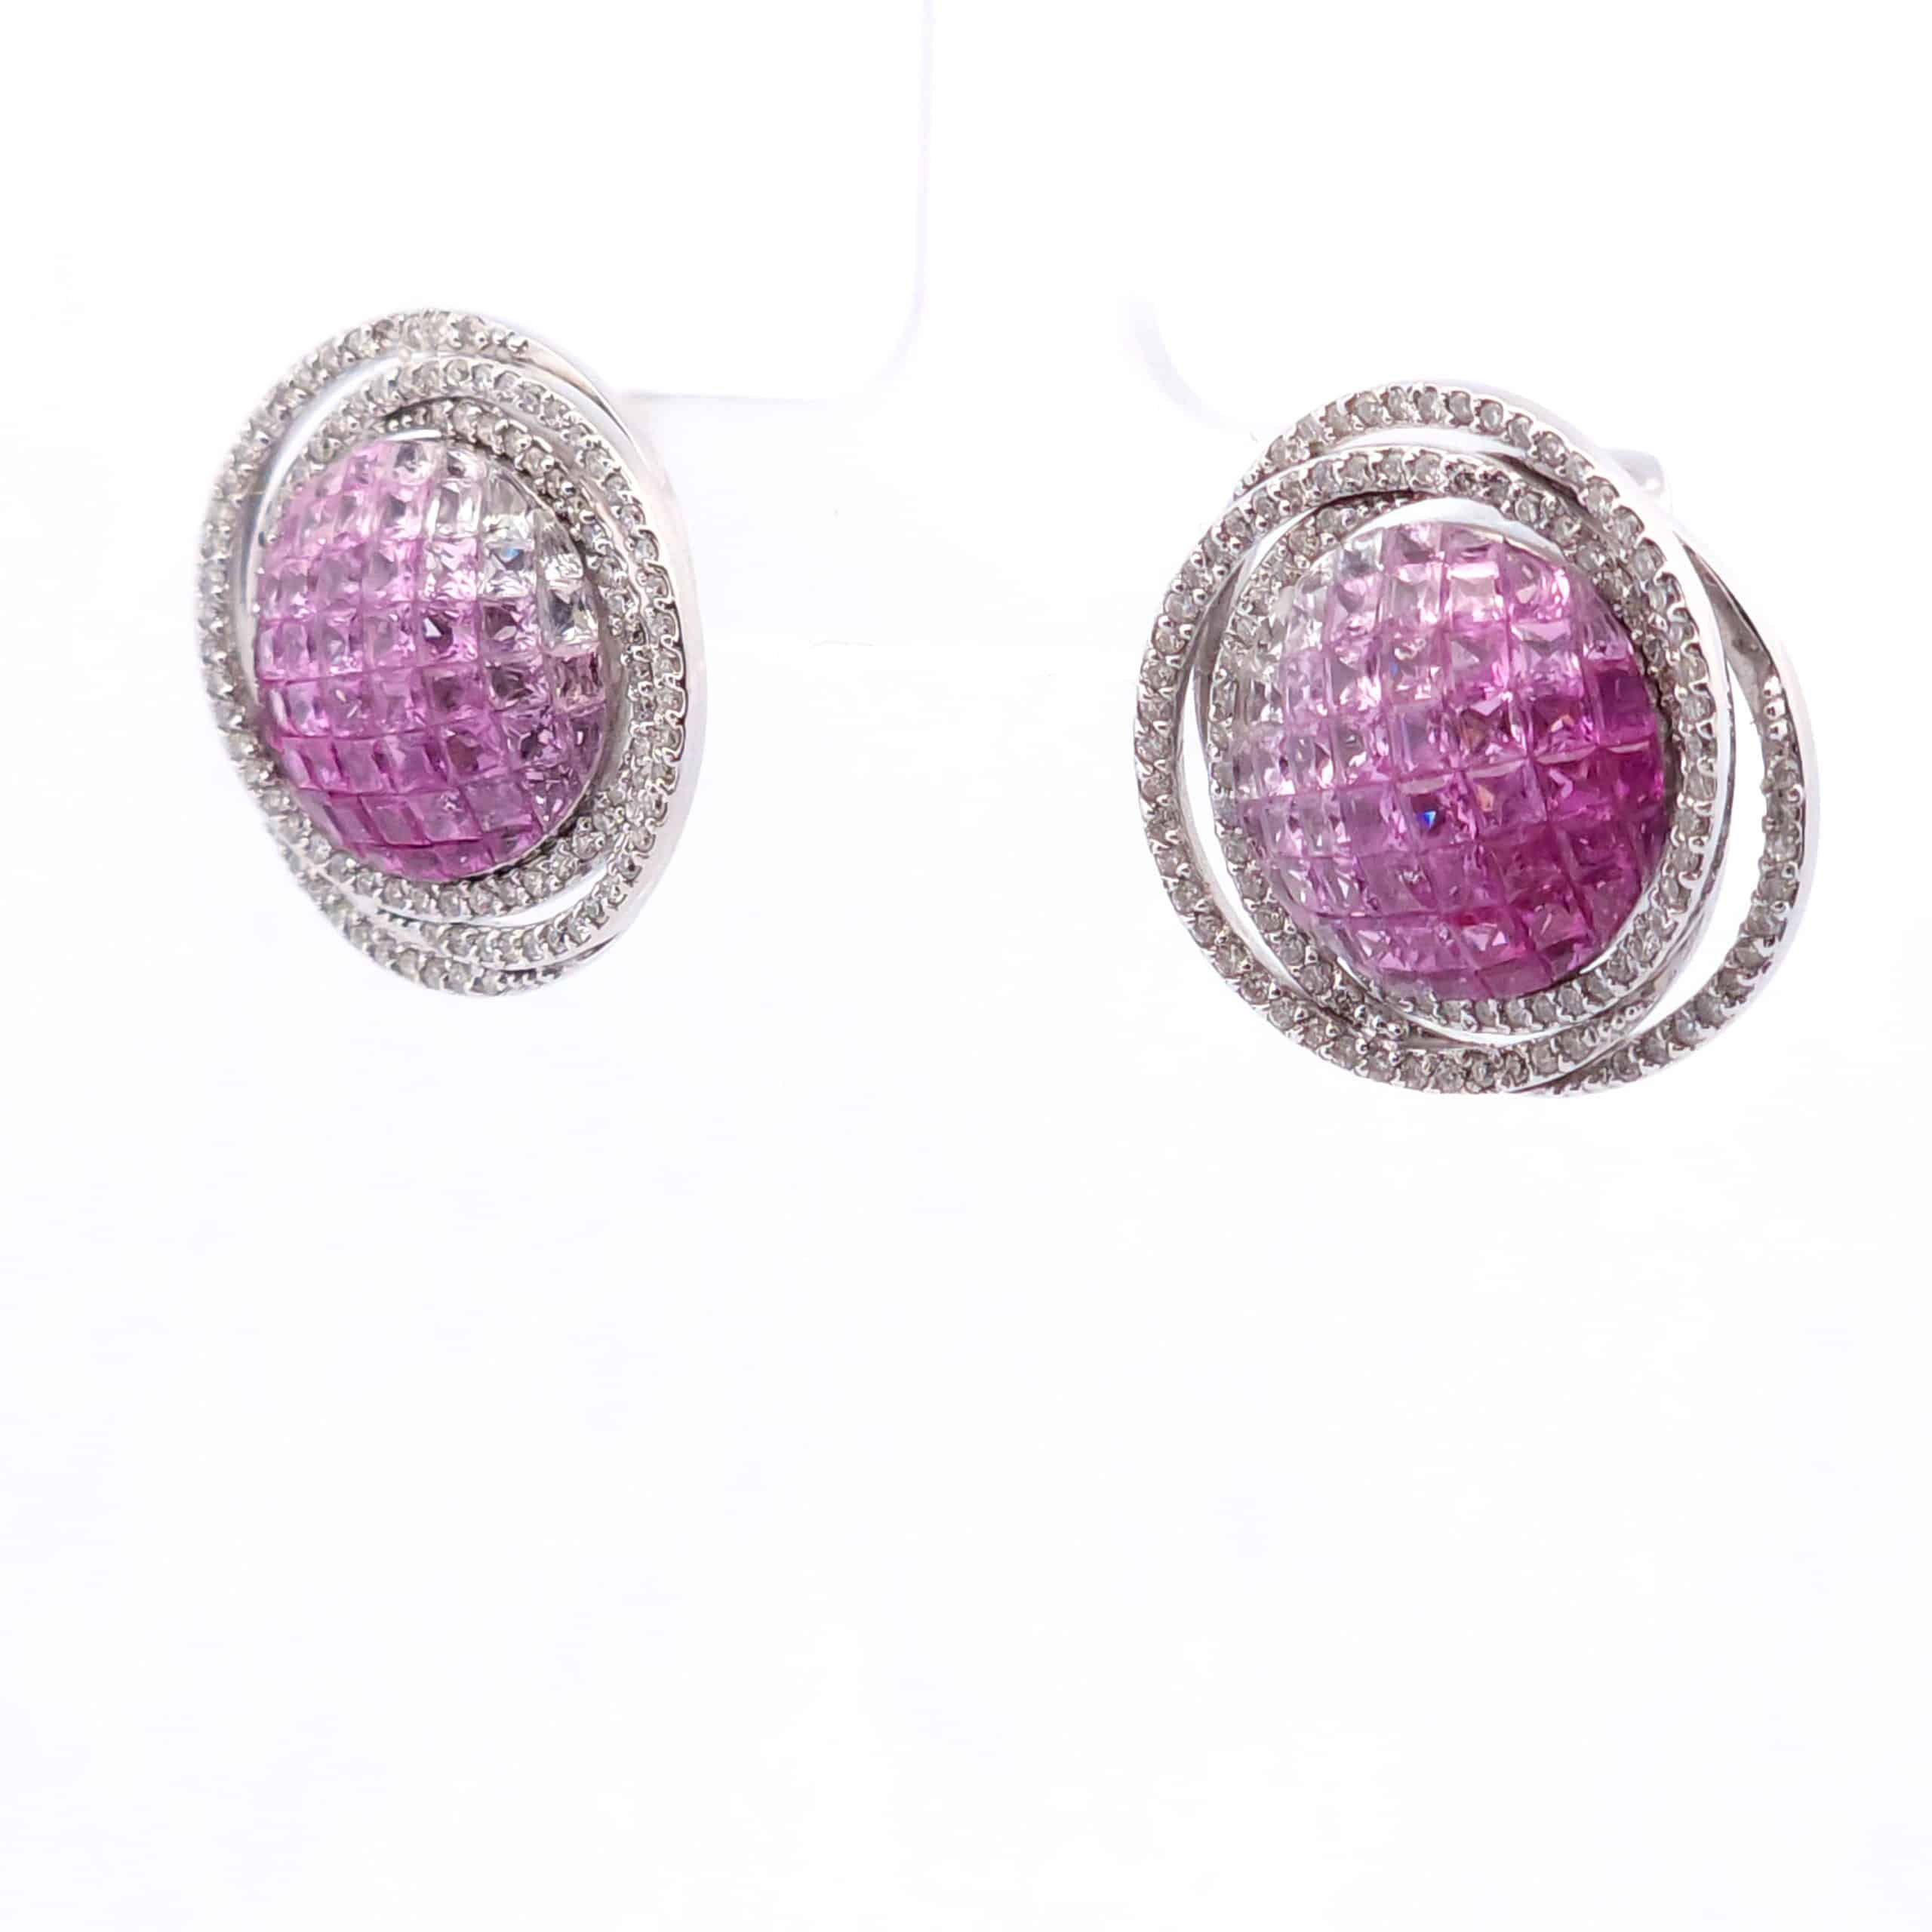 6 1/2 Carat Pink Sapphire Saturn Earrings in 18K White Gold